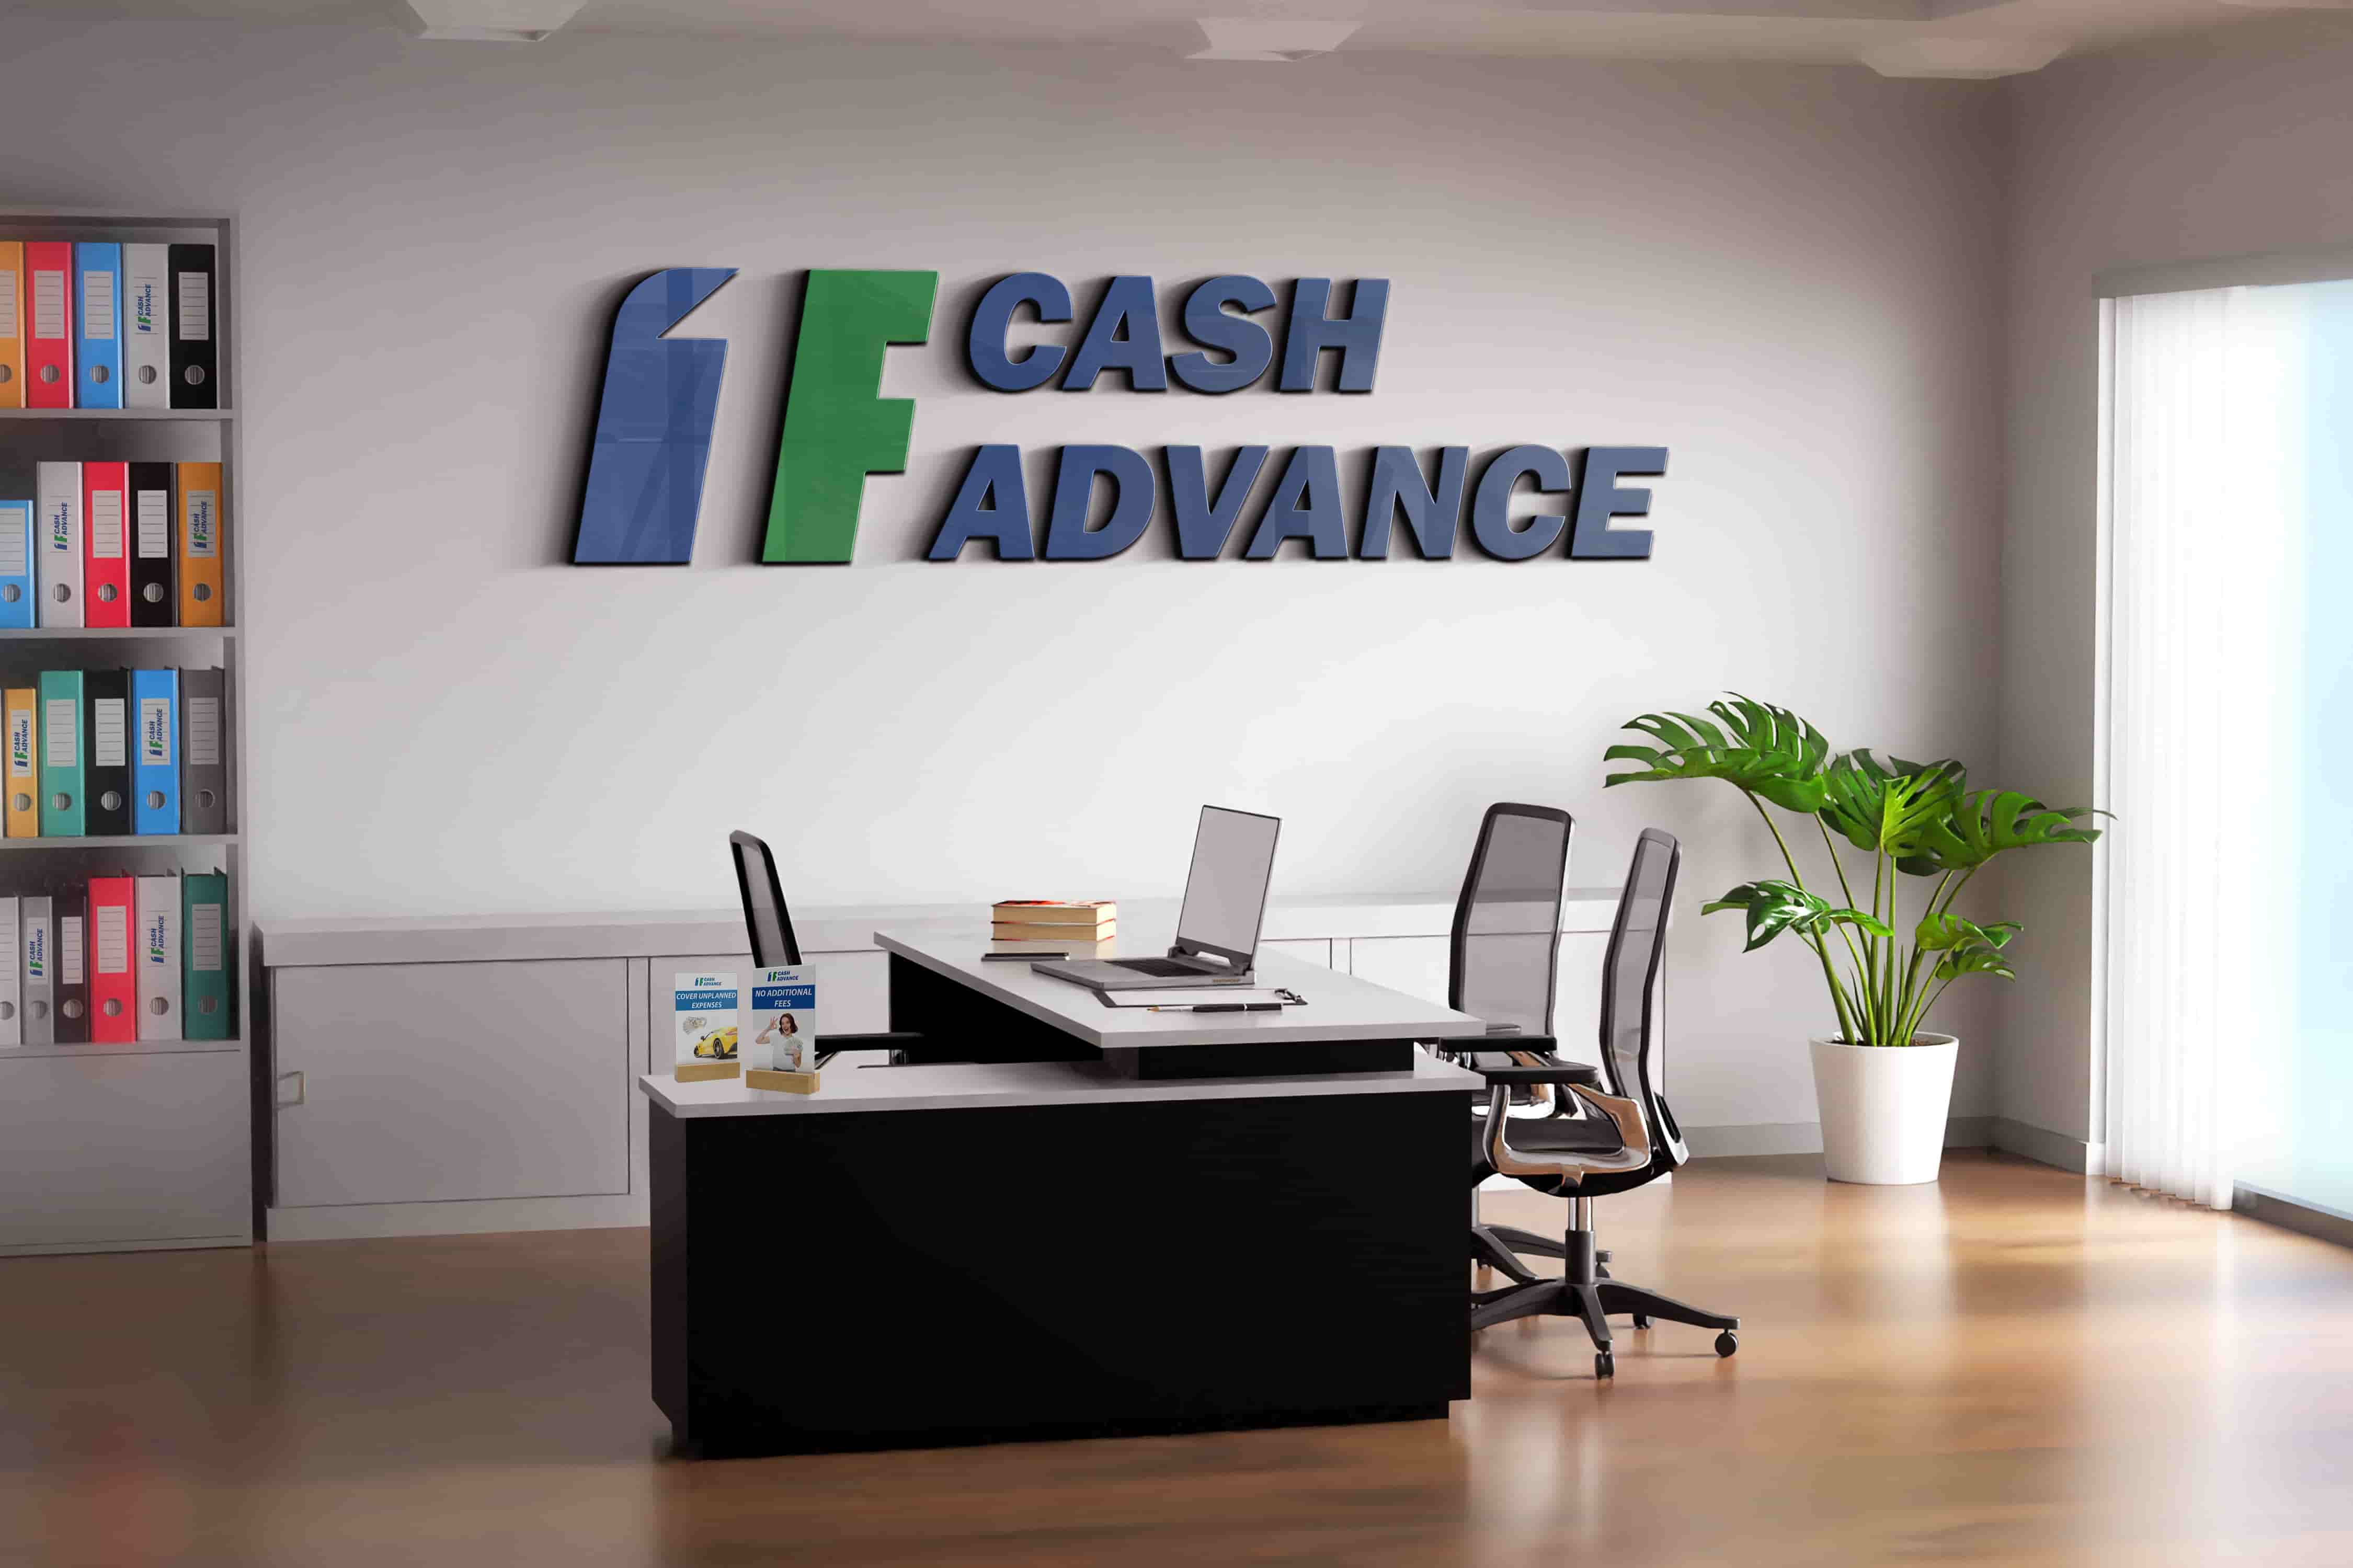 Cash advance in Manchester, New Hampshire